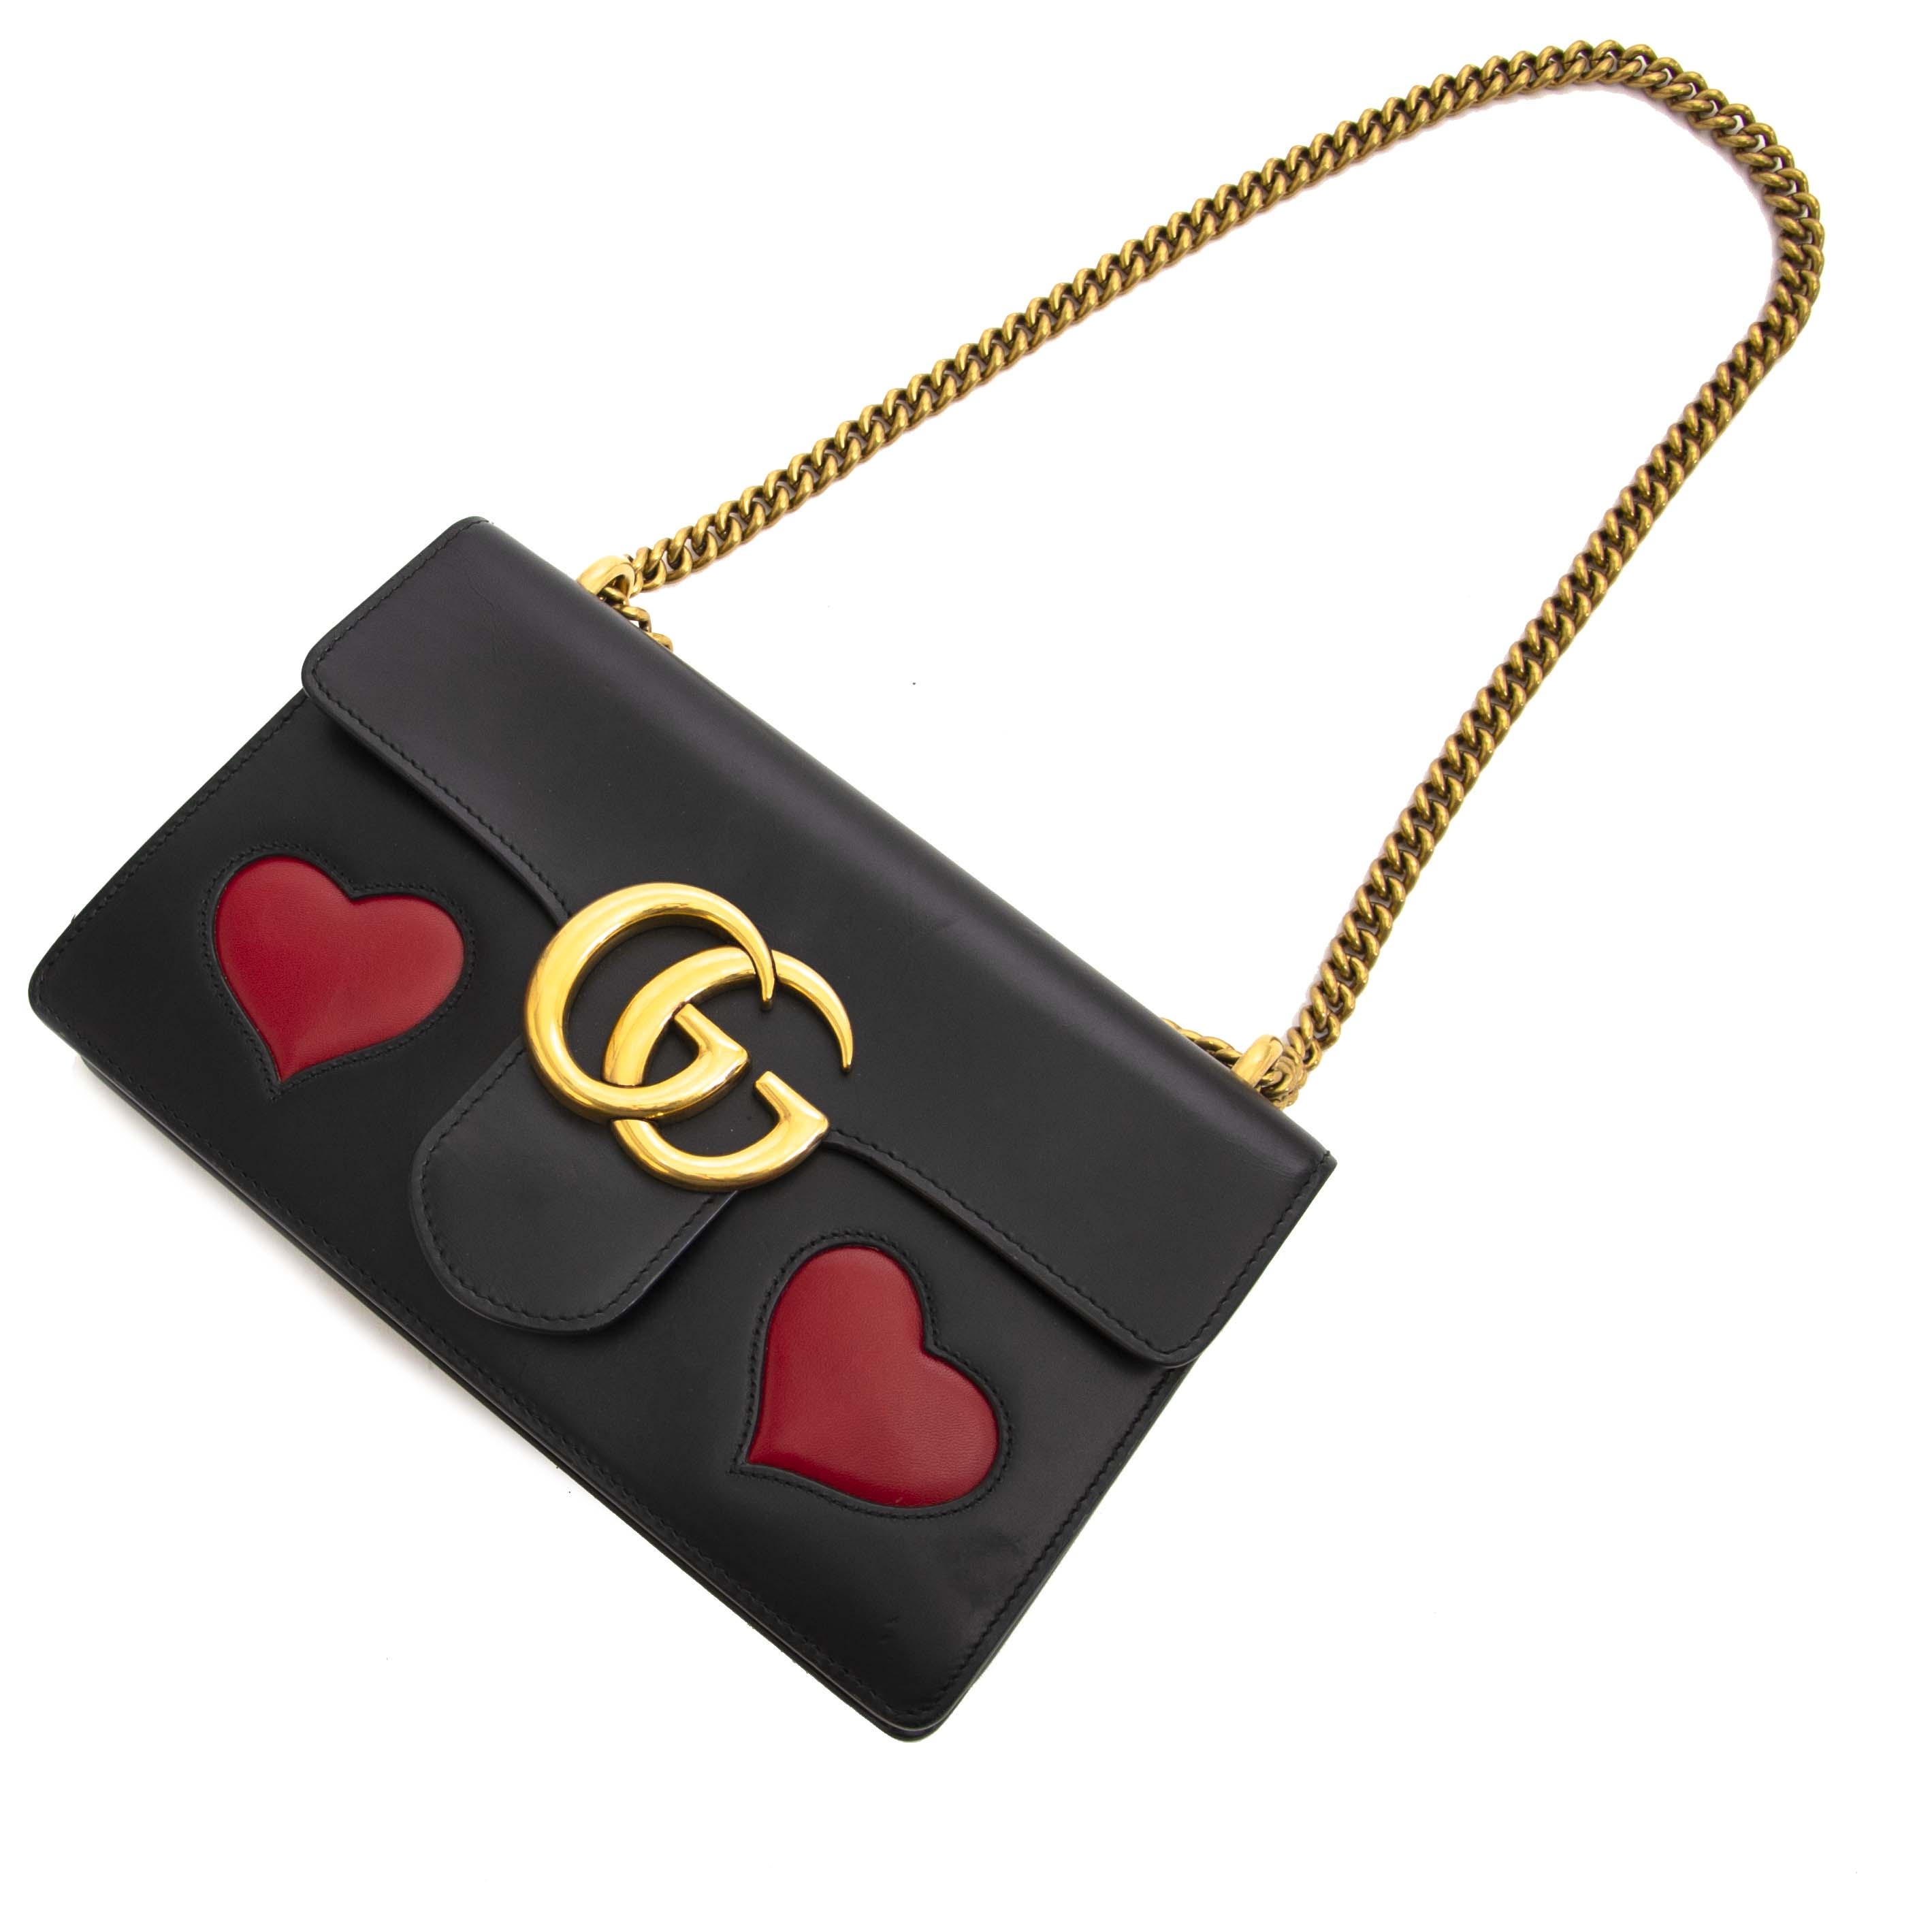 Gucci-GG-Marmont-Red-Heart-Leather-Shoulder-Bag